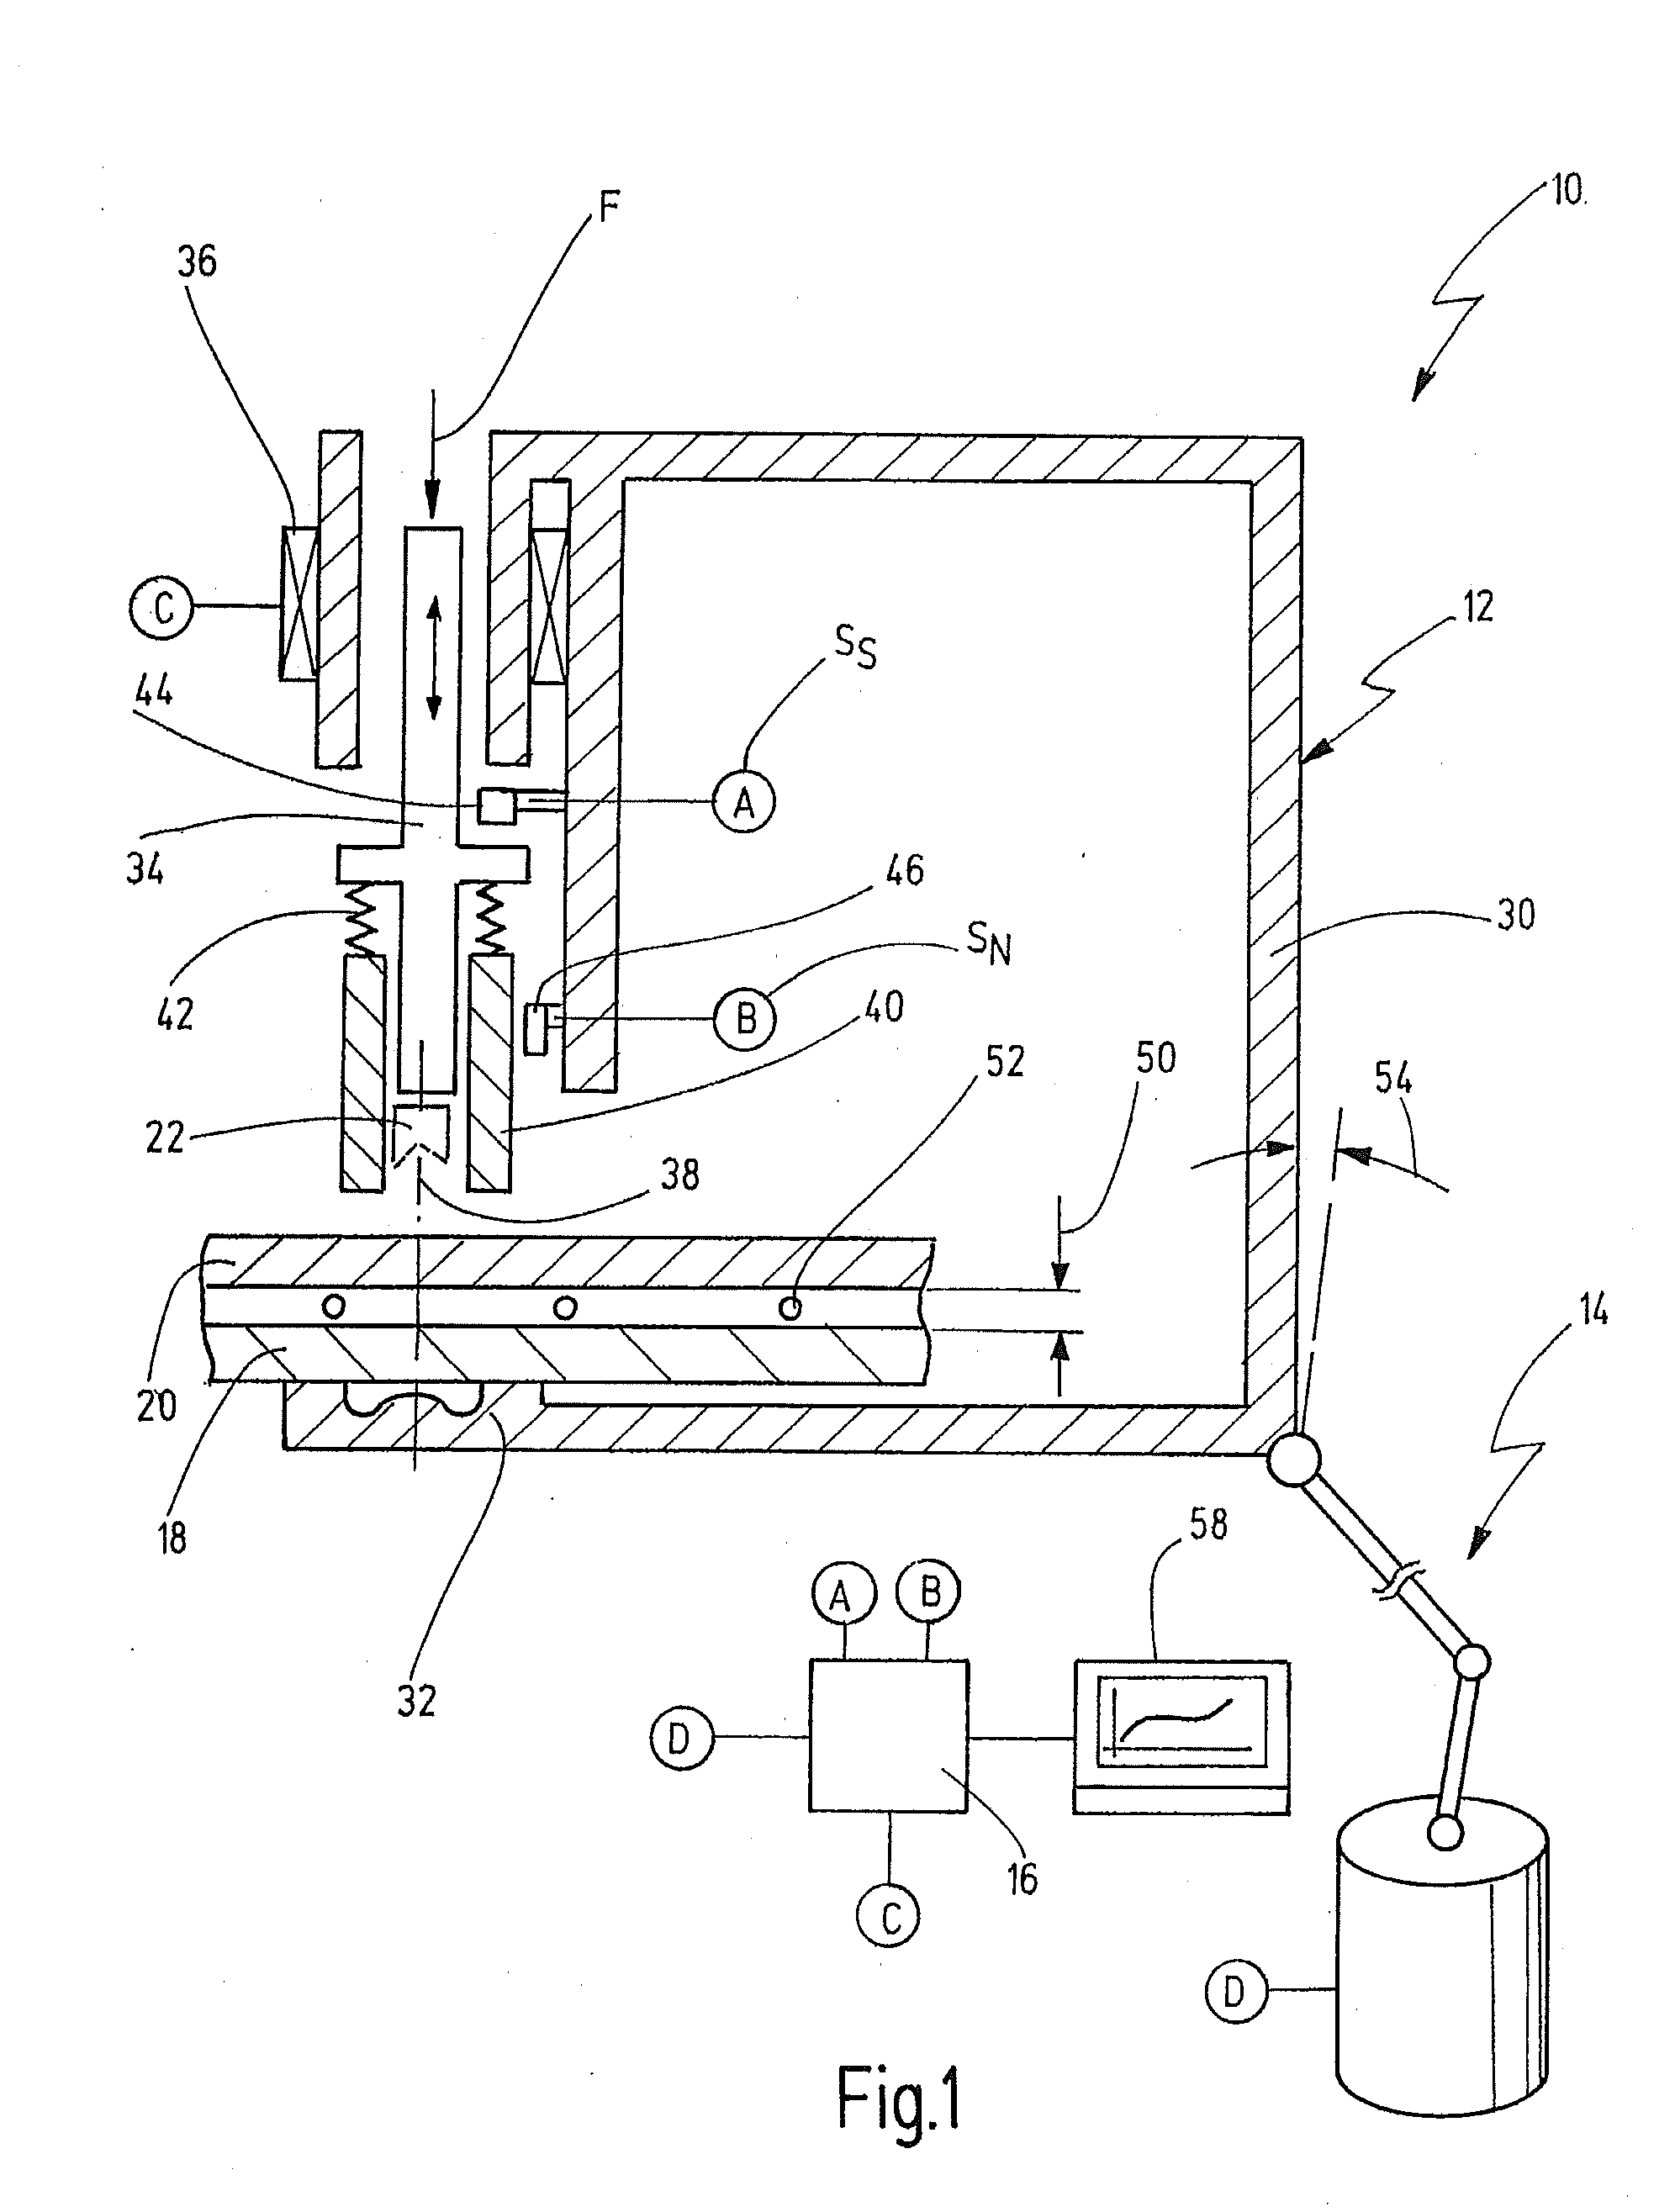 Method for monitoring a joining process